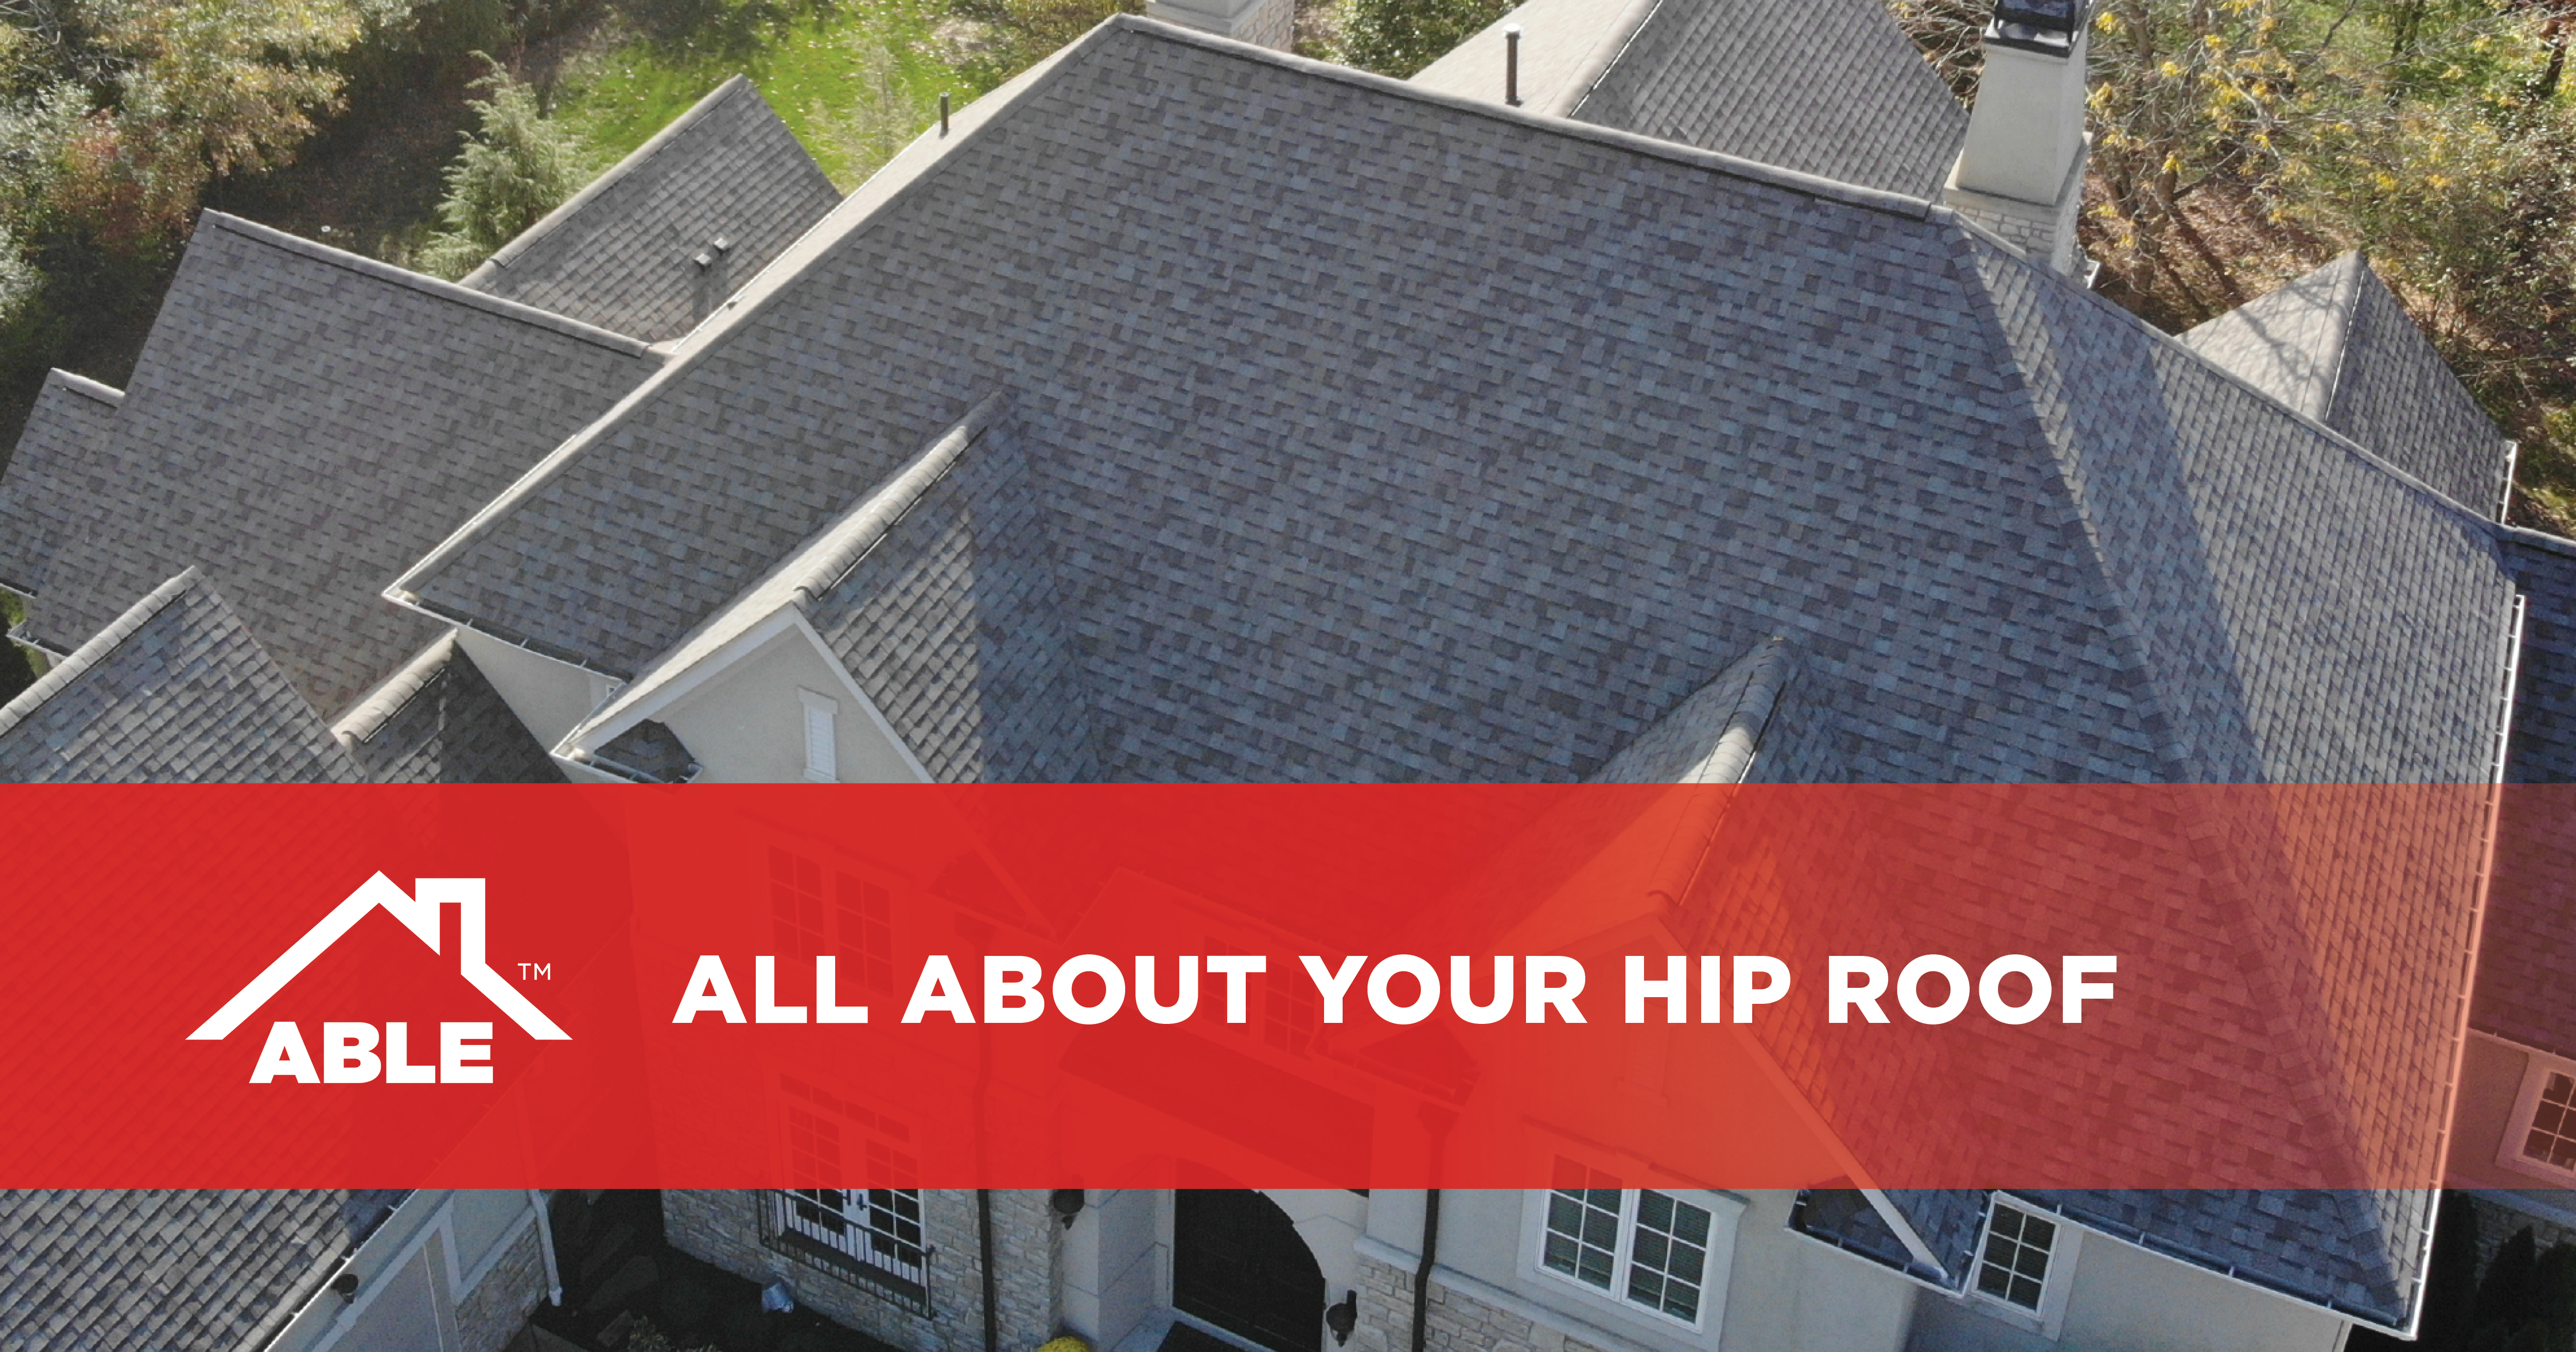 All about your hip roof